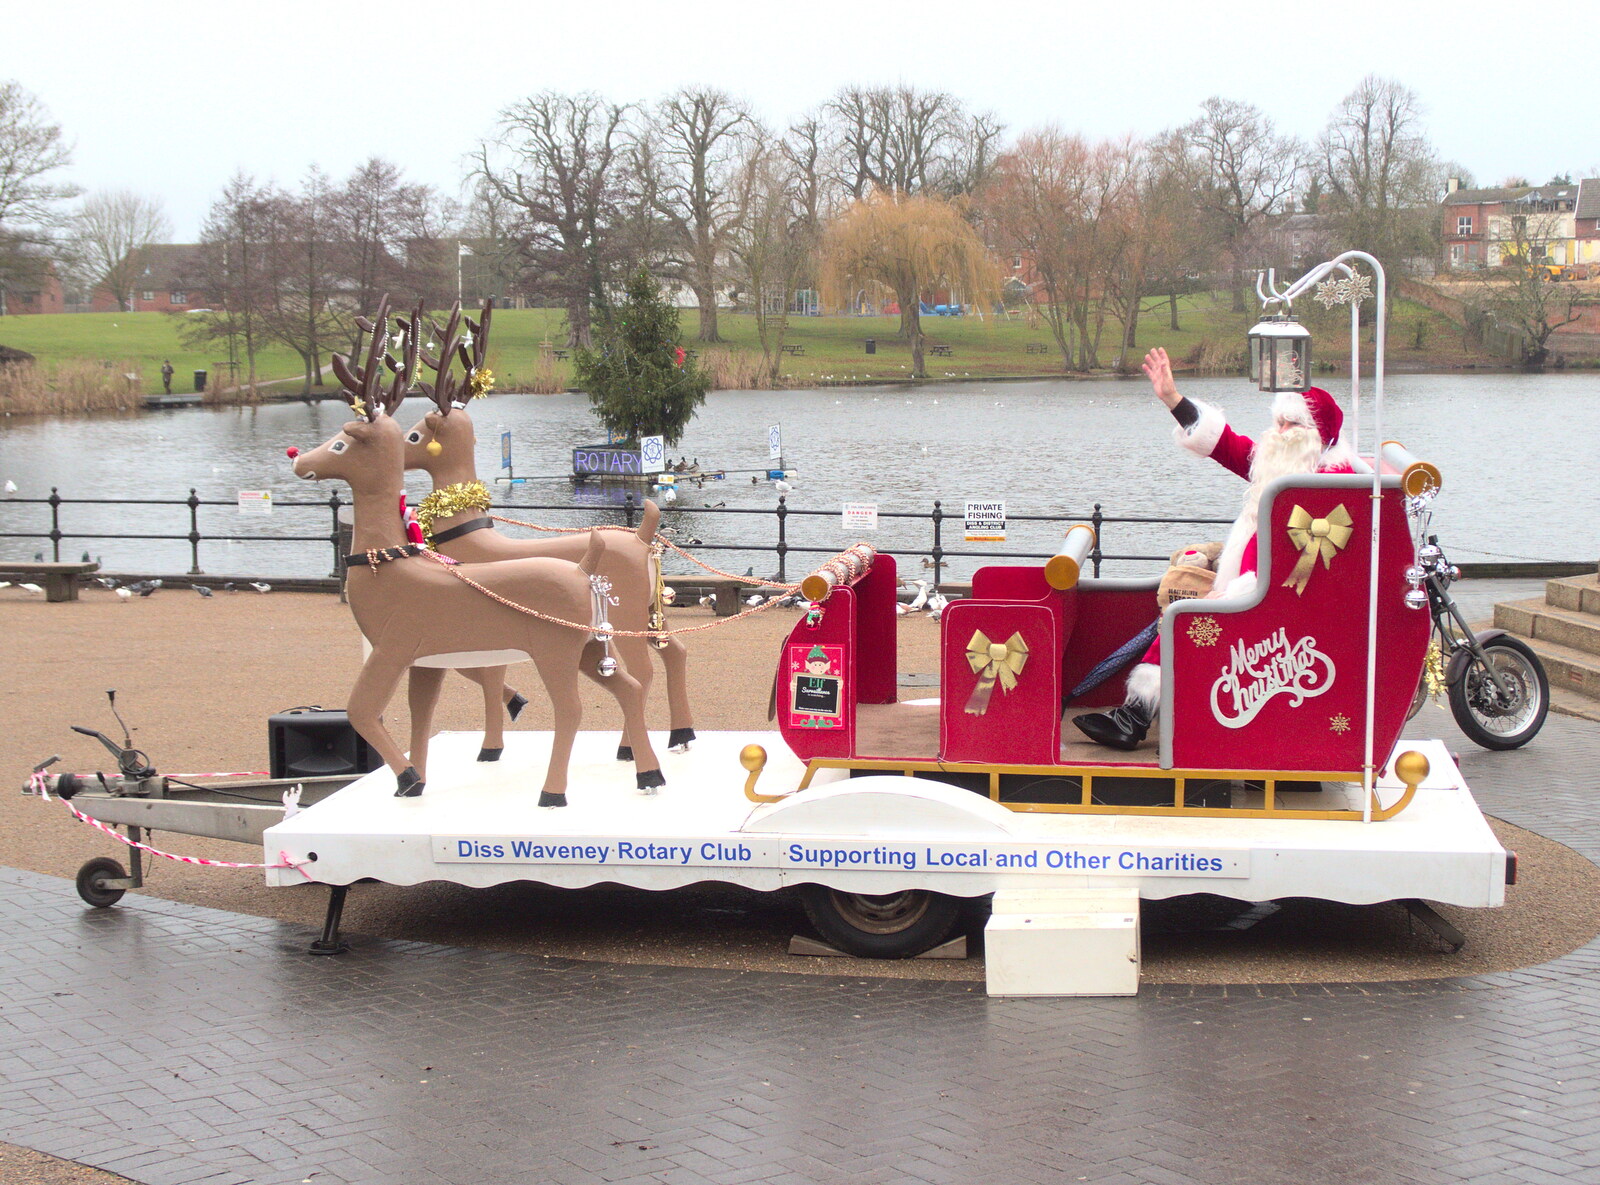 Santa's on his sleigh down at the Mere from A Spot of Christmas Shopping, Norwich and Diss, Norfolk - 23rd December 2017